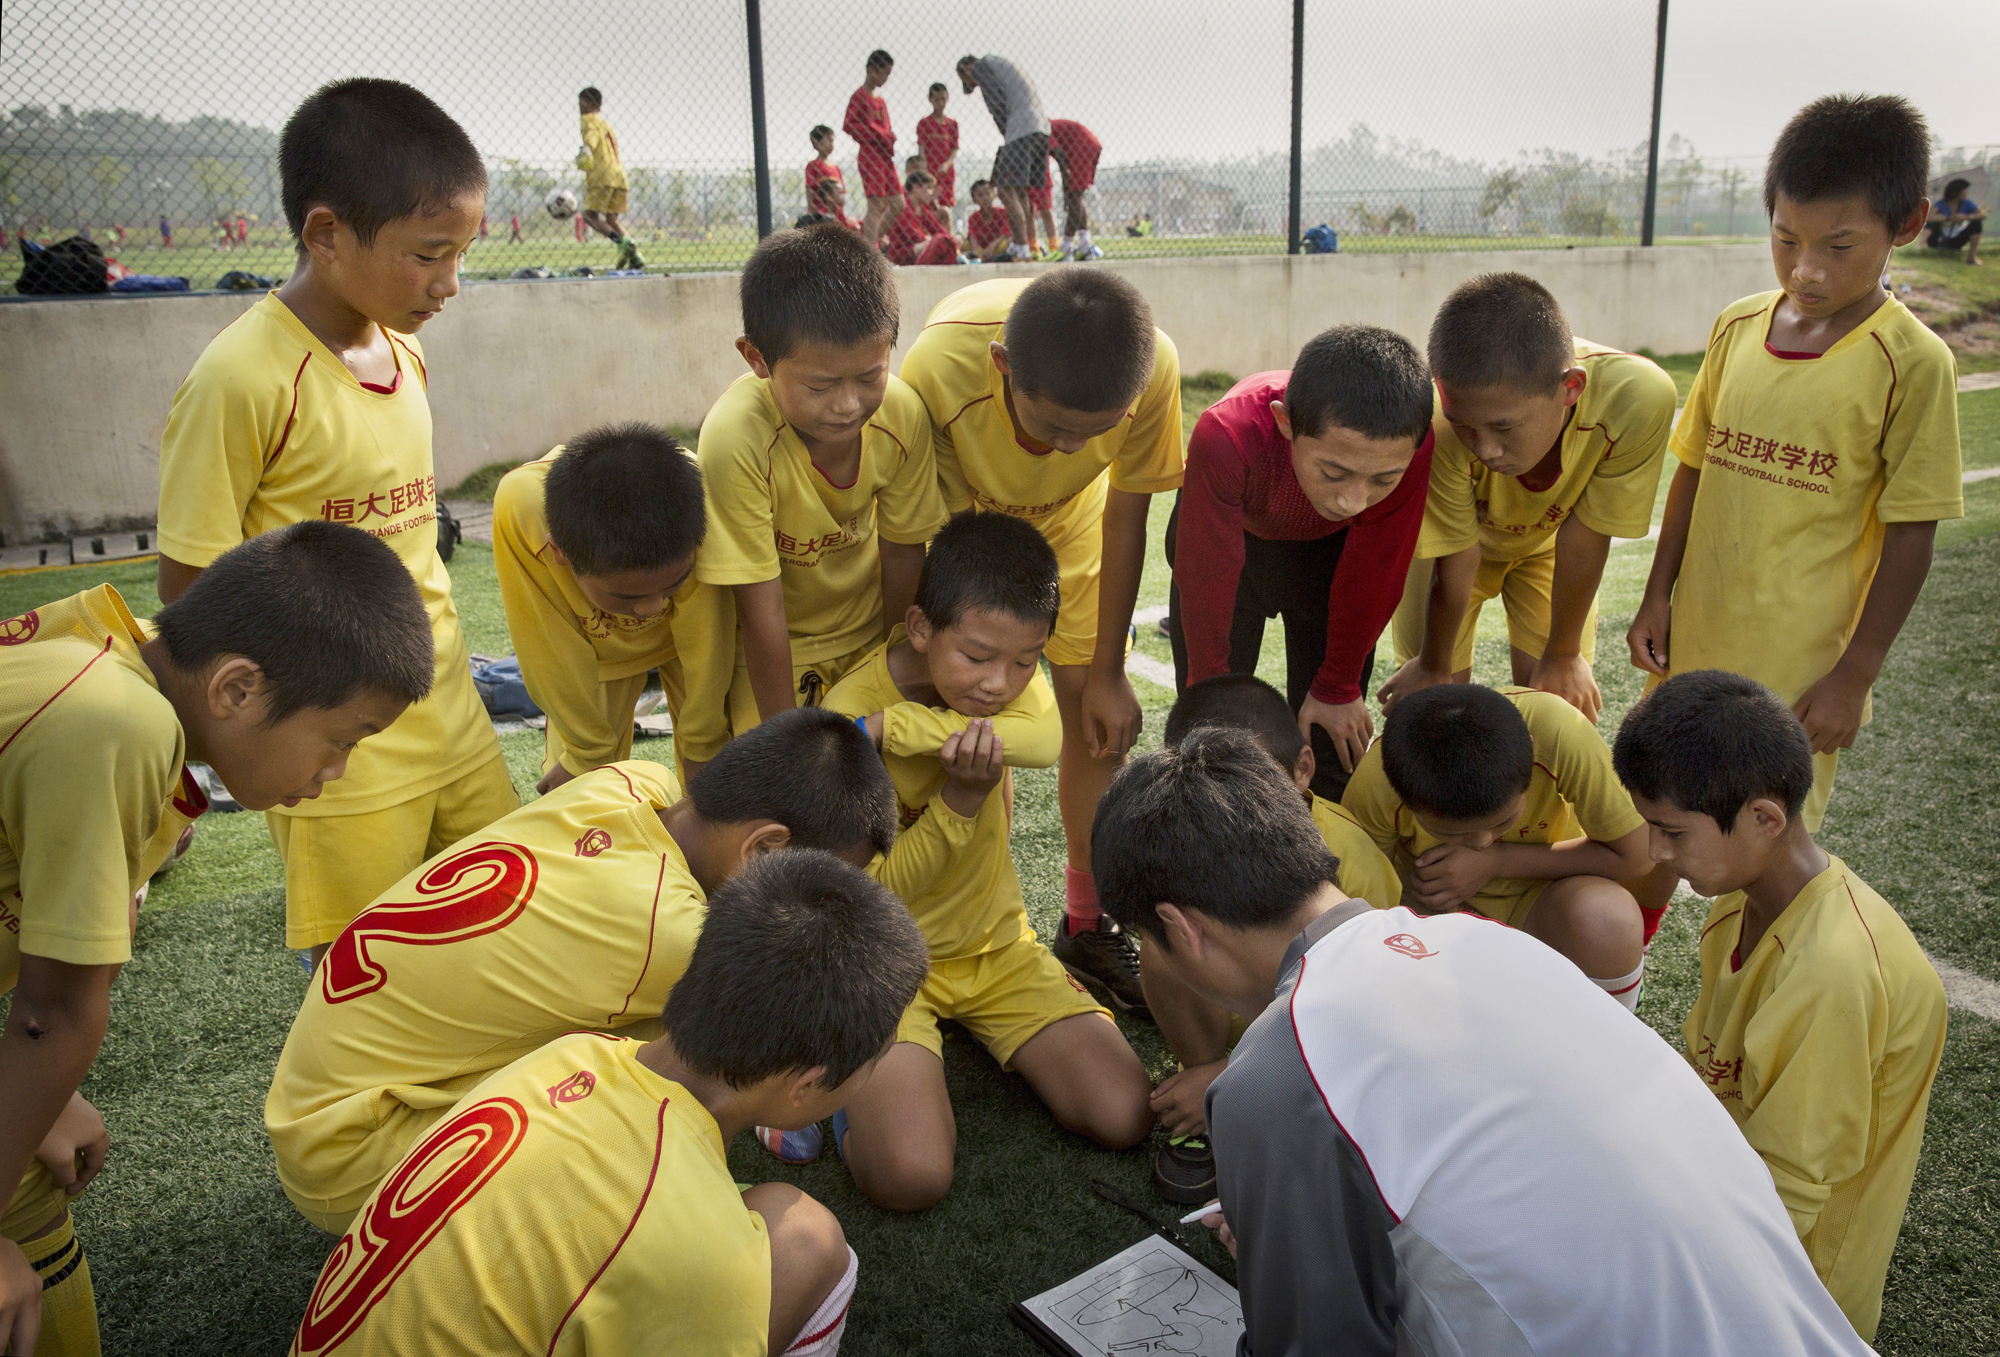 Players listen to instructions from the coach prior to a training match at the Evergrande International Football School on June 14.